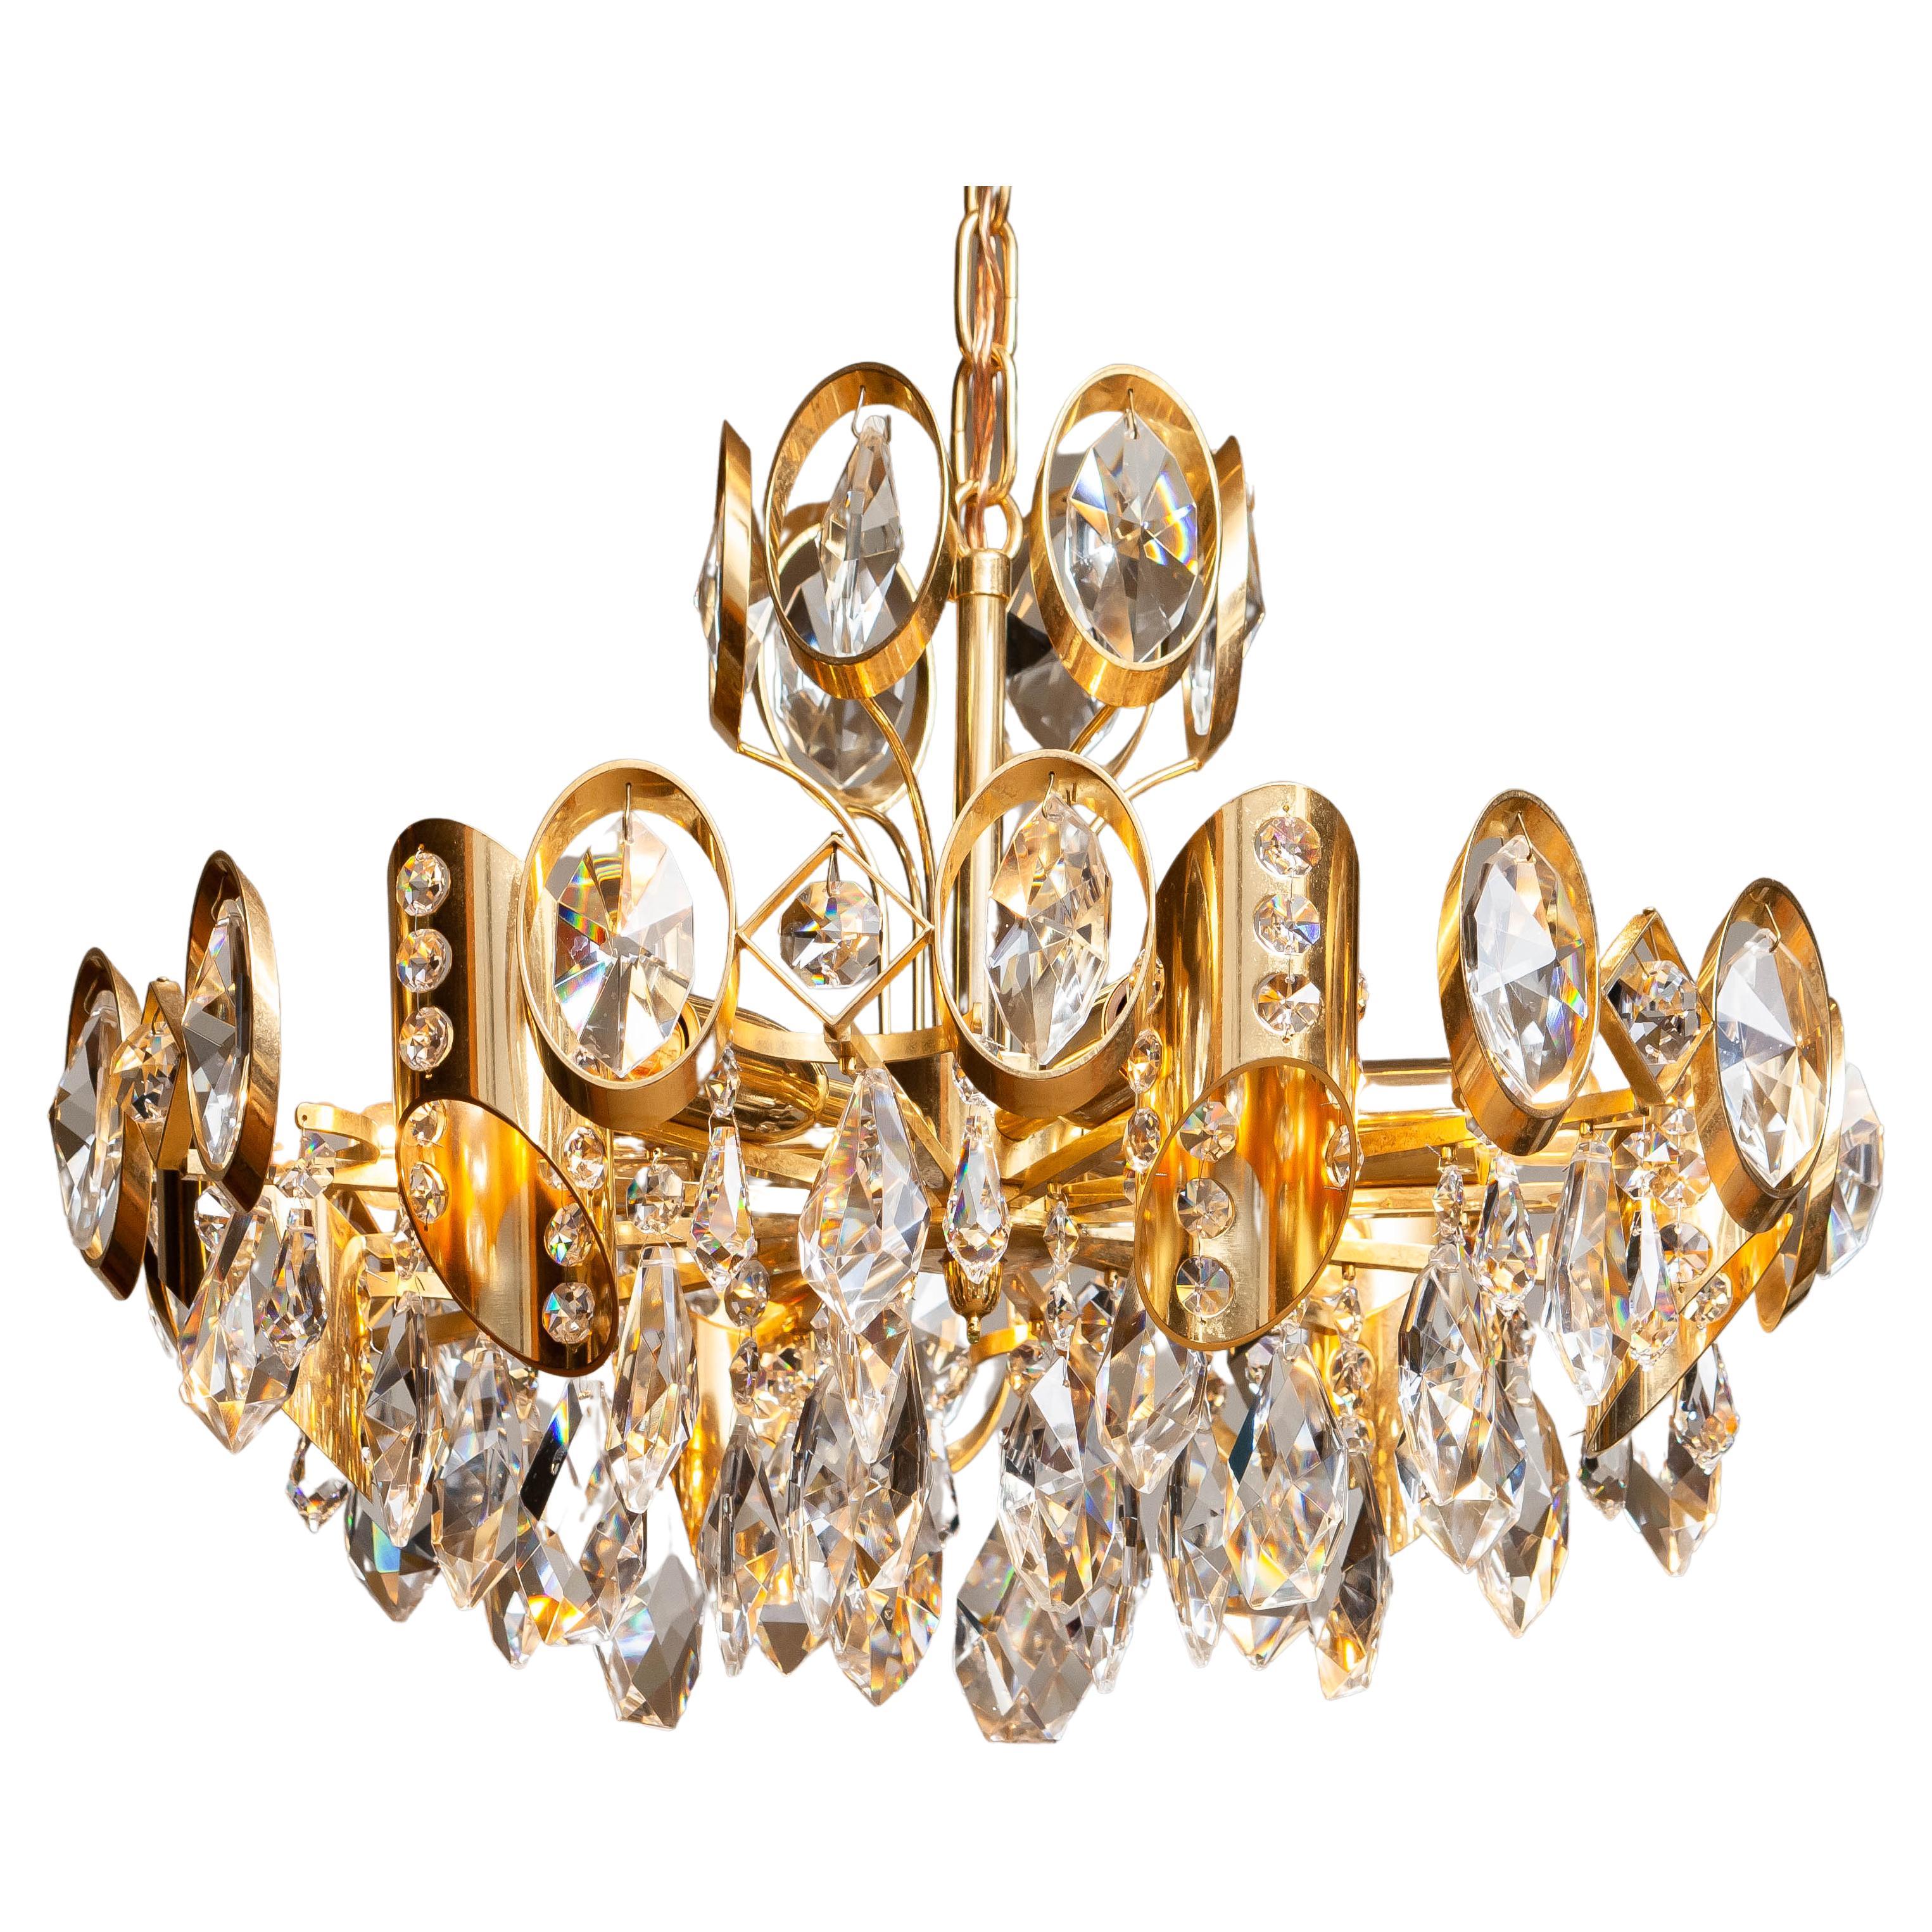 1960's Gilt Brass Filled with Large Faceted Crystals Chandelier by Ernest Palme